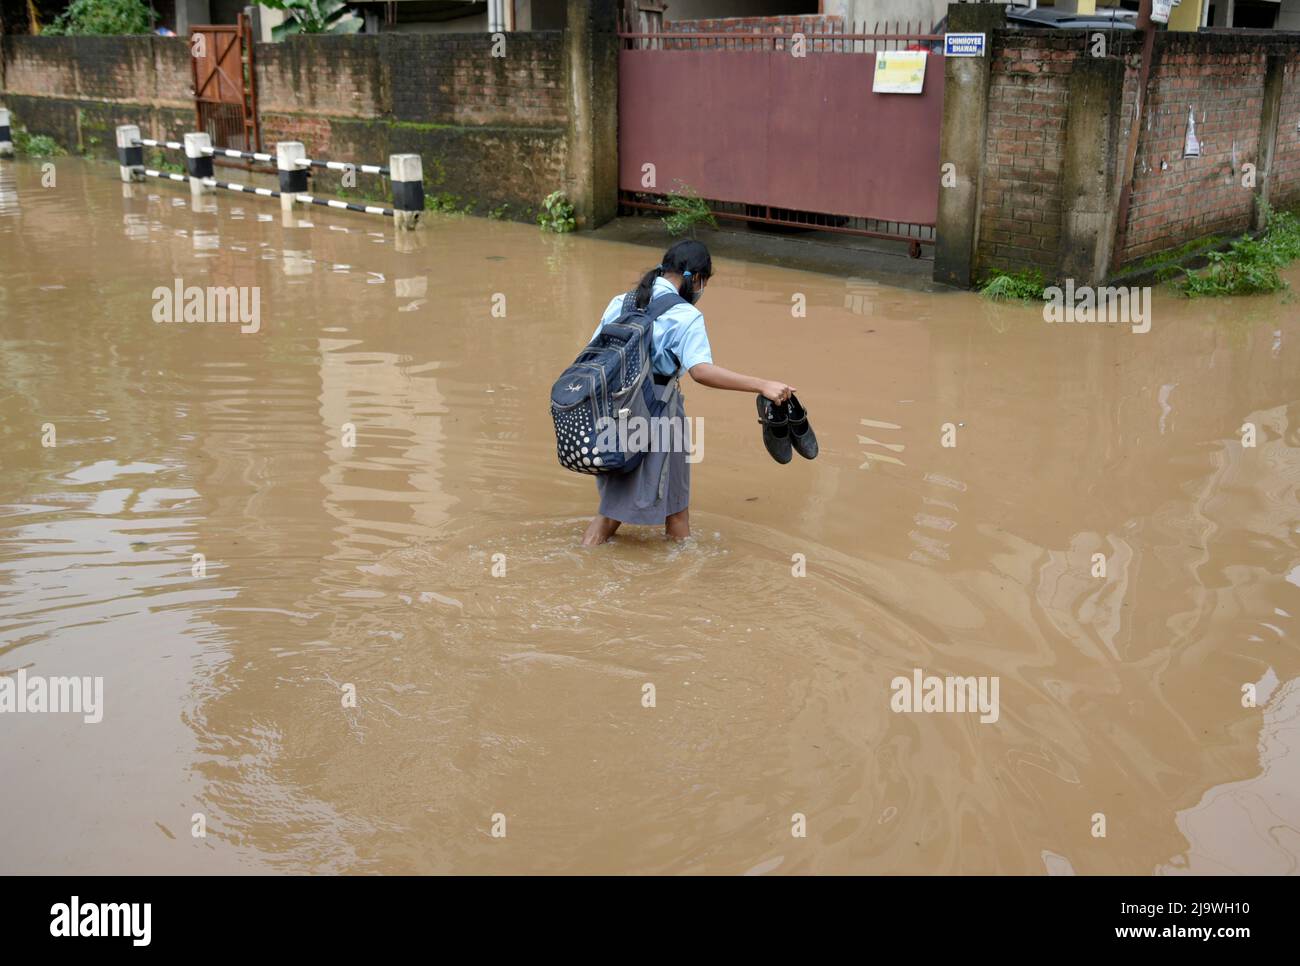 Guwahati, Assam, India. 25th May, 2022. A girl returns from school wades across a flooded street after heavy rains, in Guwahati, Assam, India on 25 May 2022. Waterlogging is a common scene in Guwahati city due to poor drainage system. Credit: David Talukdar/Alamy Live News Stock Photo